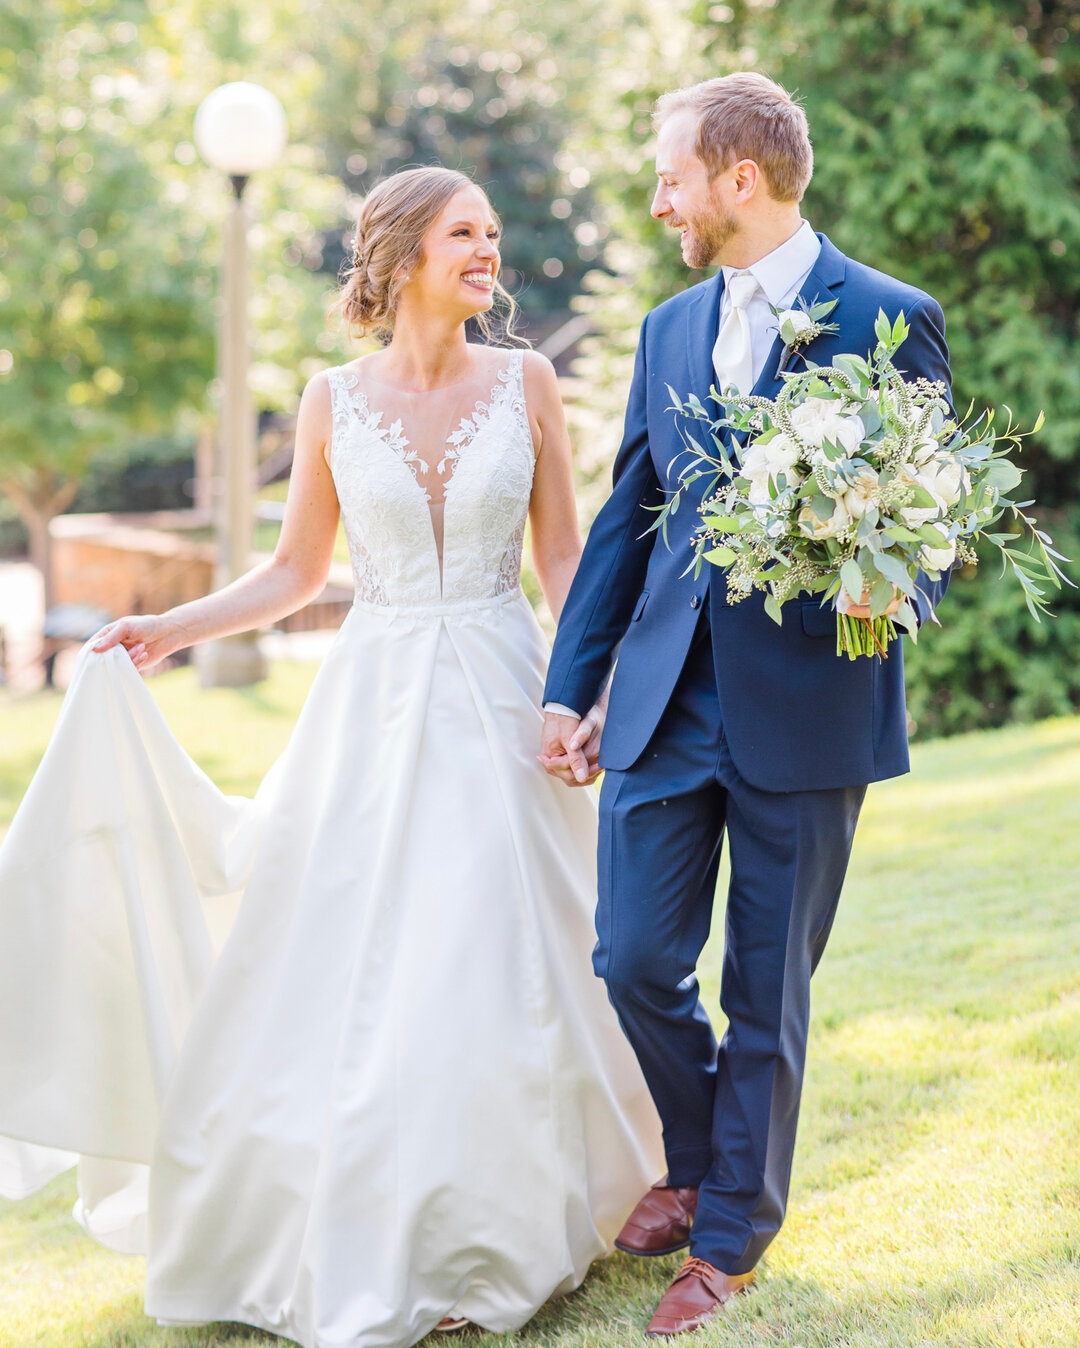 Who else is ready for Spring wedding season?! The only thing more beautiful than springtime florals is two beautiful humans in love! (Especially if one of them is wearing a Bustle gown 🤍)​​​​​​​​
​​​​​​​​
Photographer: @chelseamortonphotography​​​​​